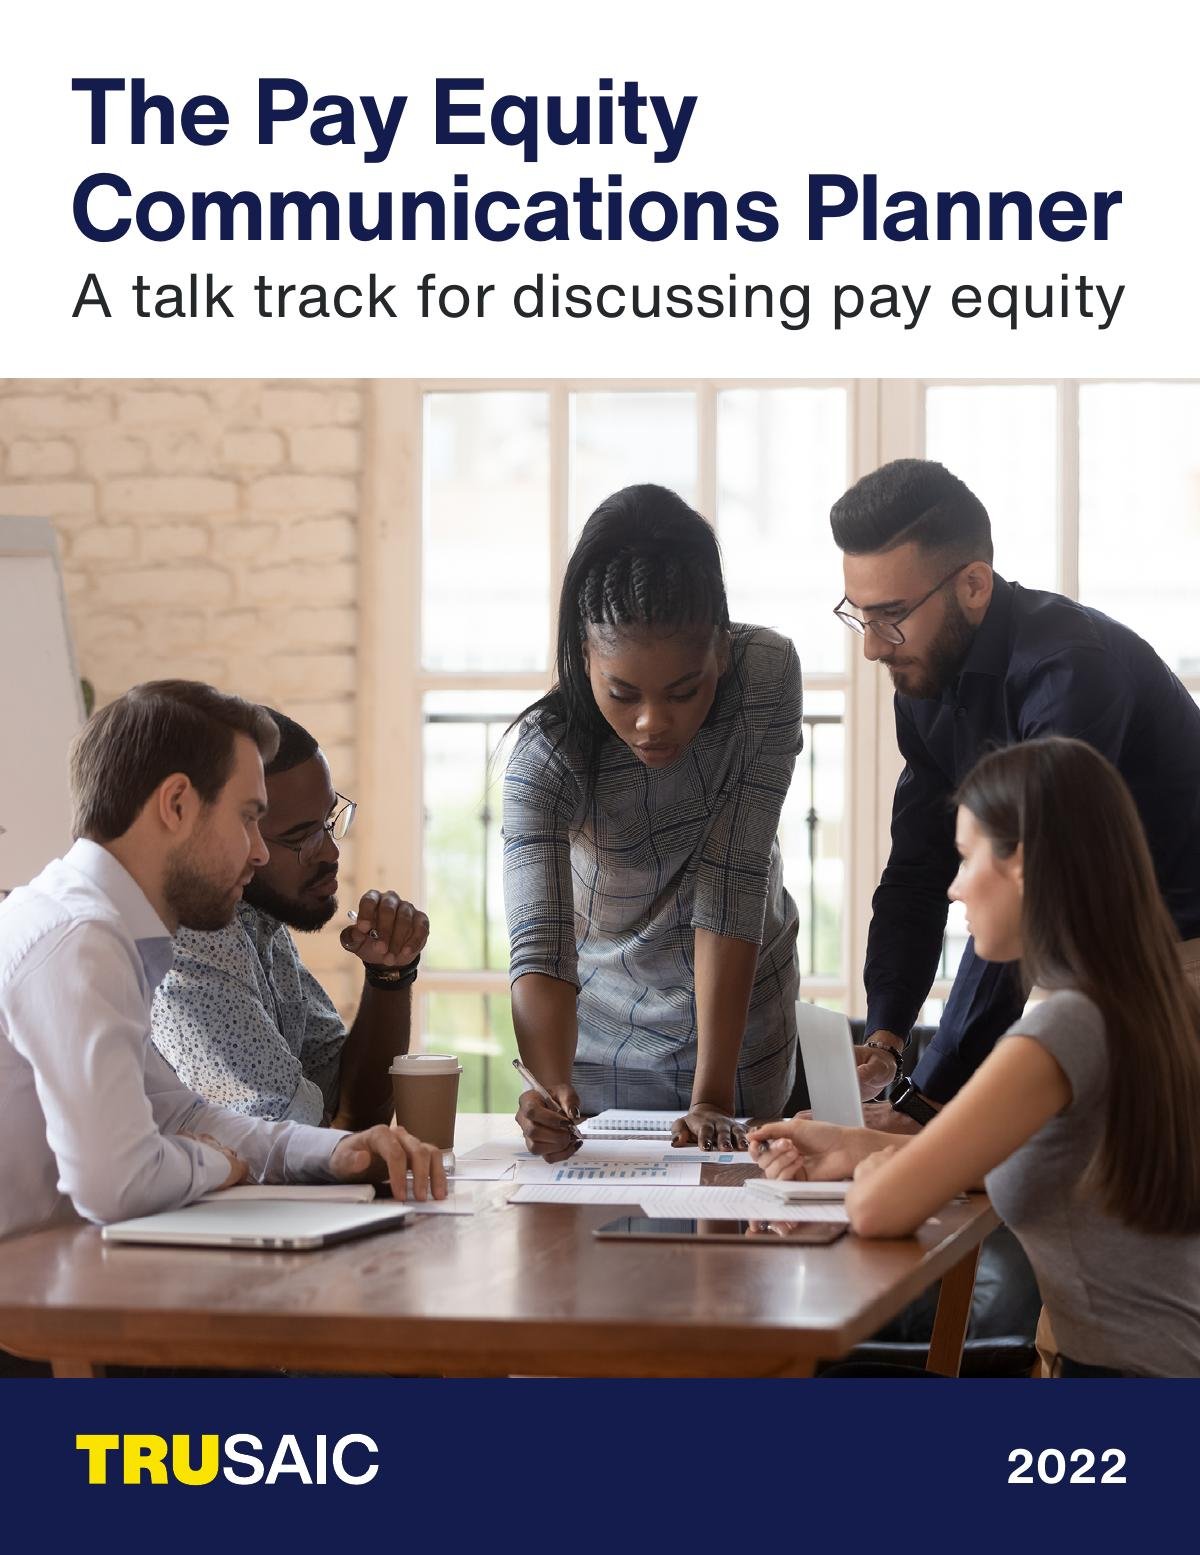 The Pay Equity Communications Planner